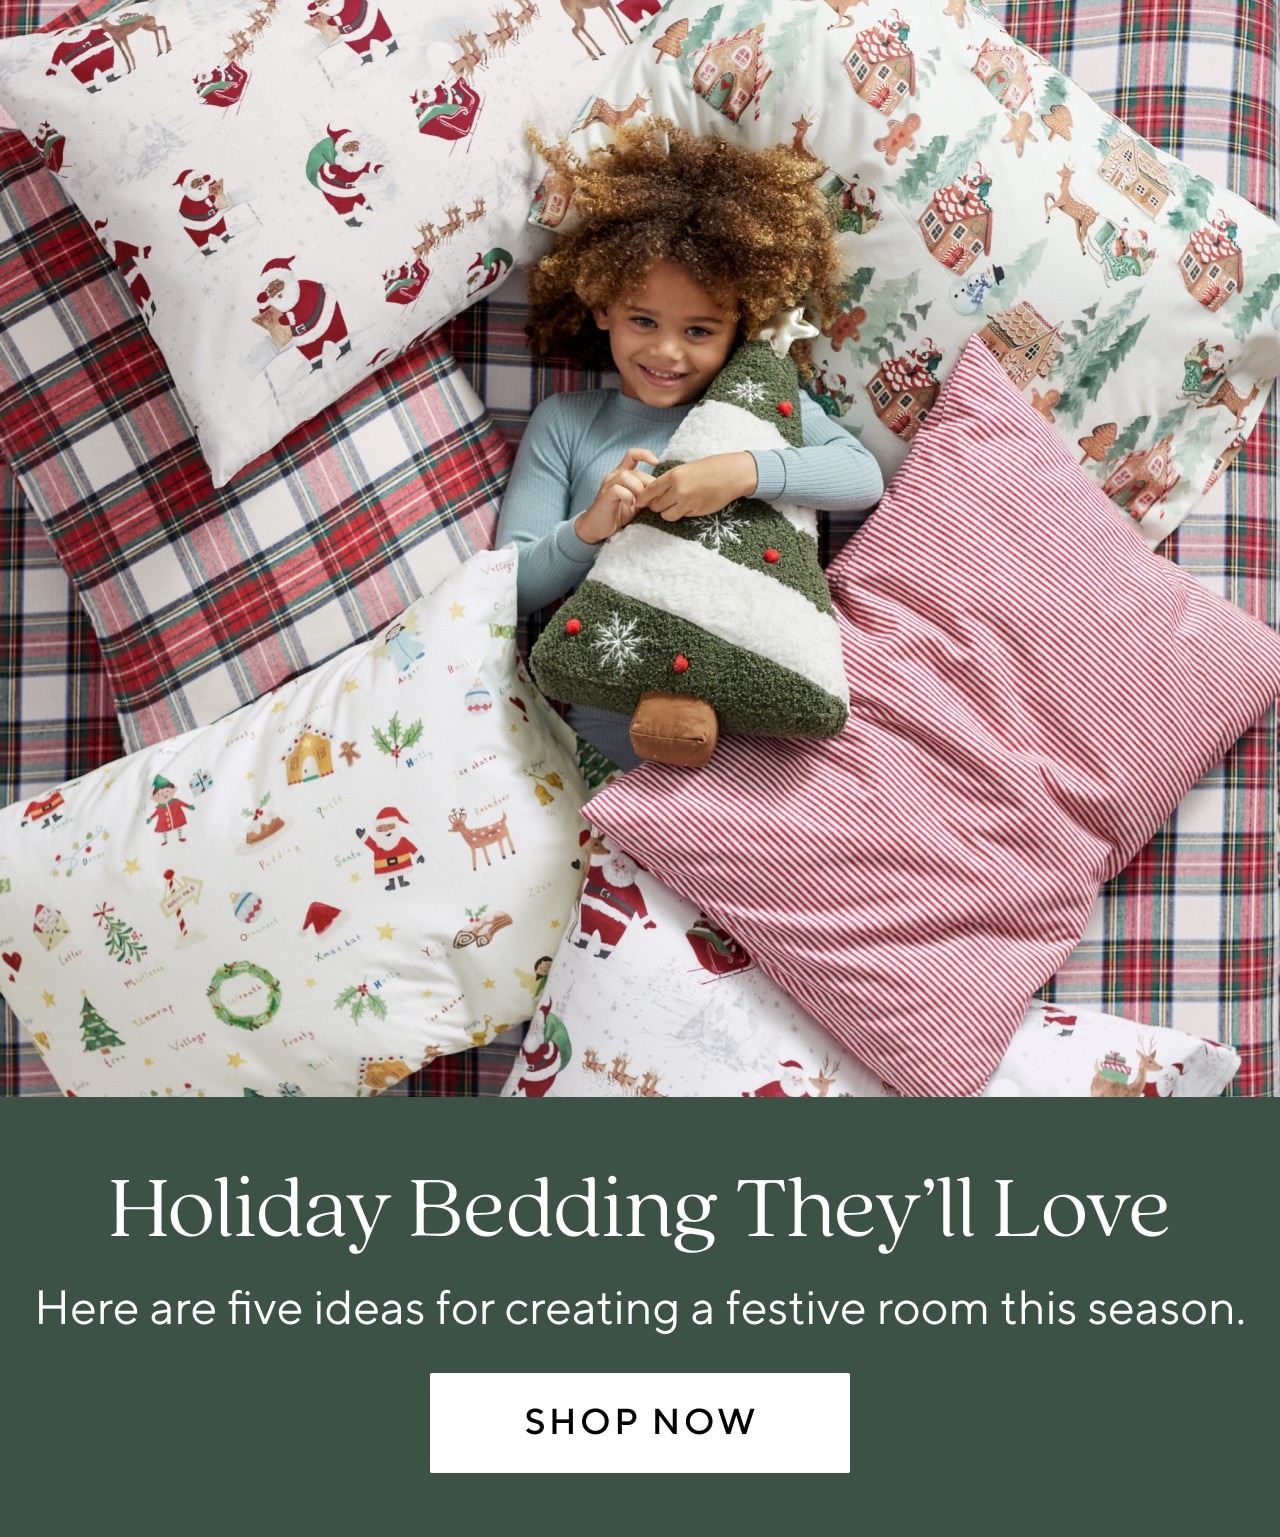 HOLIDAY BEDDING THEY'LL LOVE